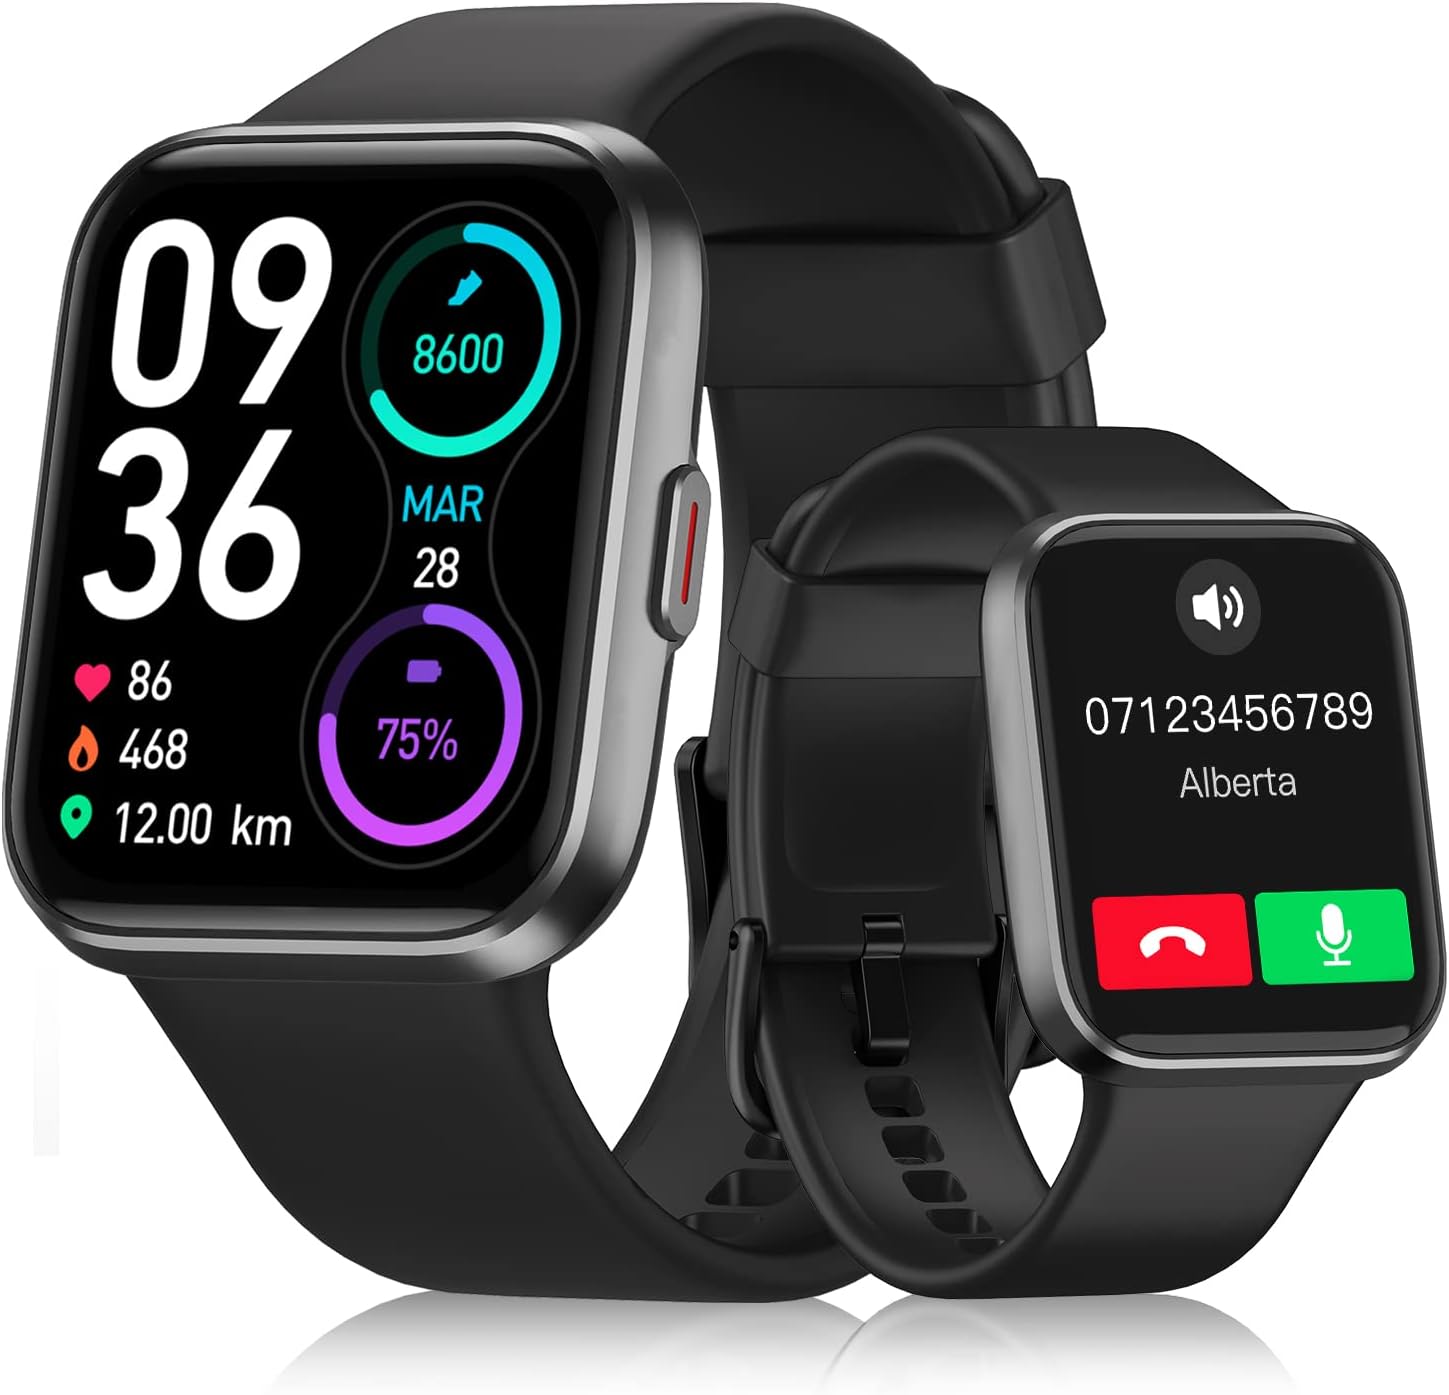 Aeac Smart Watch (Answer/Make Call) for Men Women,1.8" Fitness Watch for iPhone iOS Andriod with Heart Rate/Blood Oxygen/Sleep/Stress Monitor,100+ Sport Modes,Fitness Tracker IP68 Waterproof